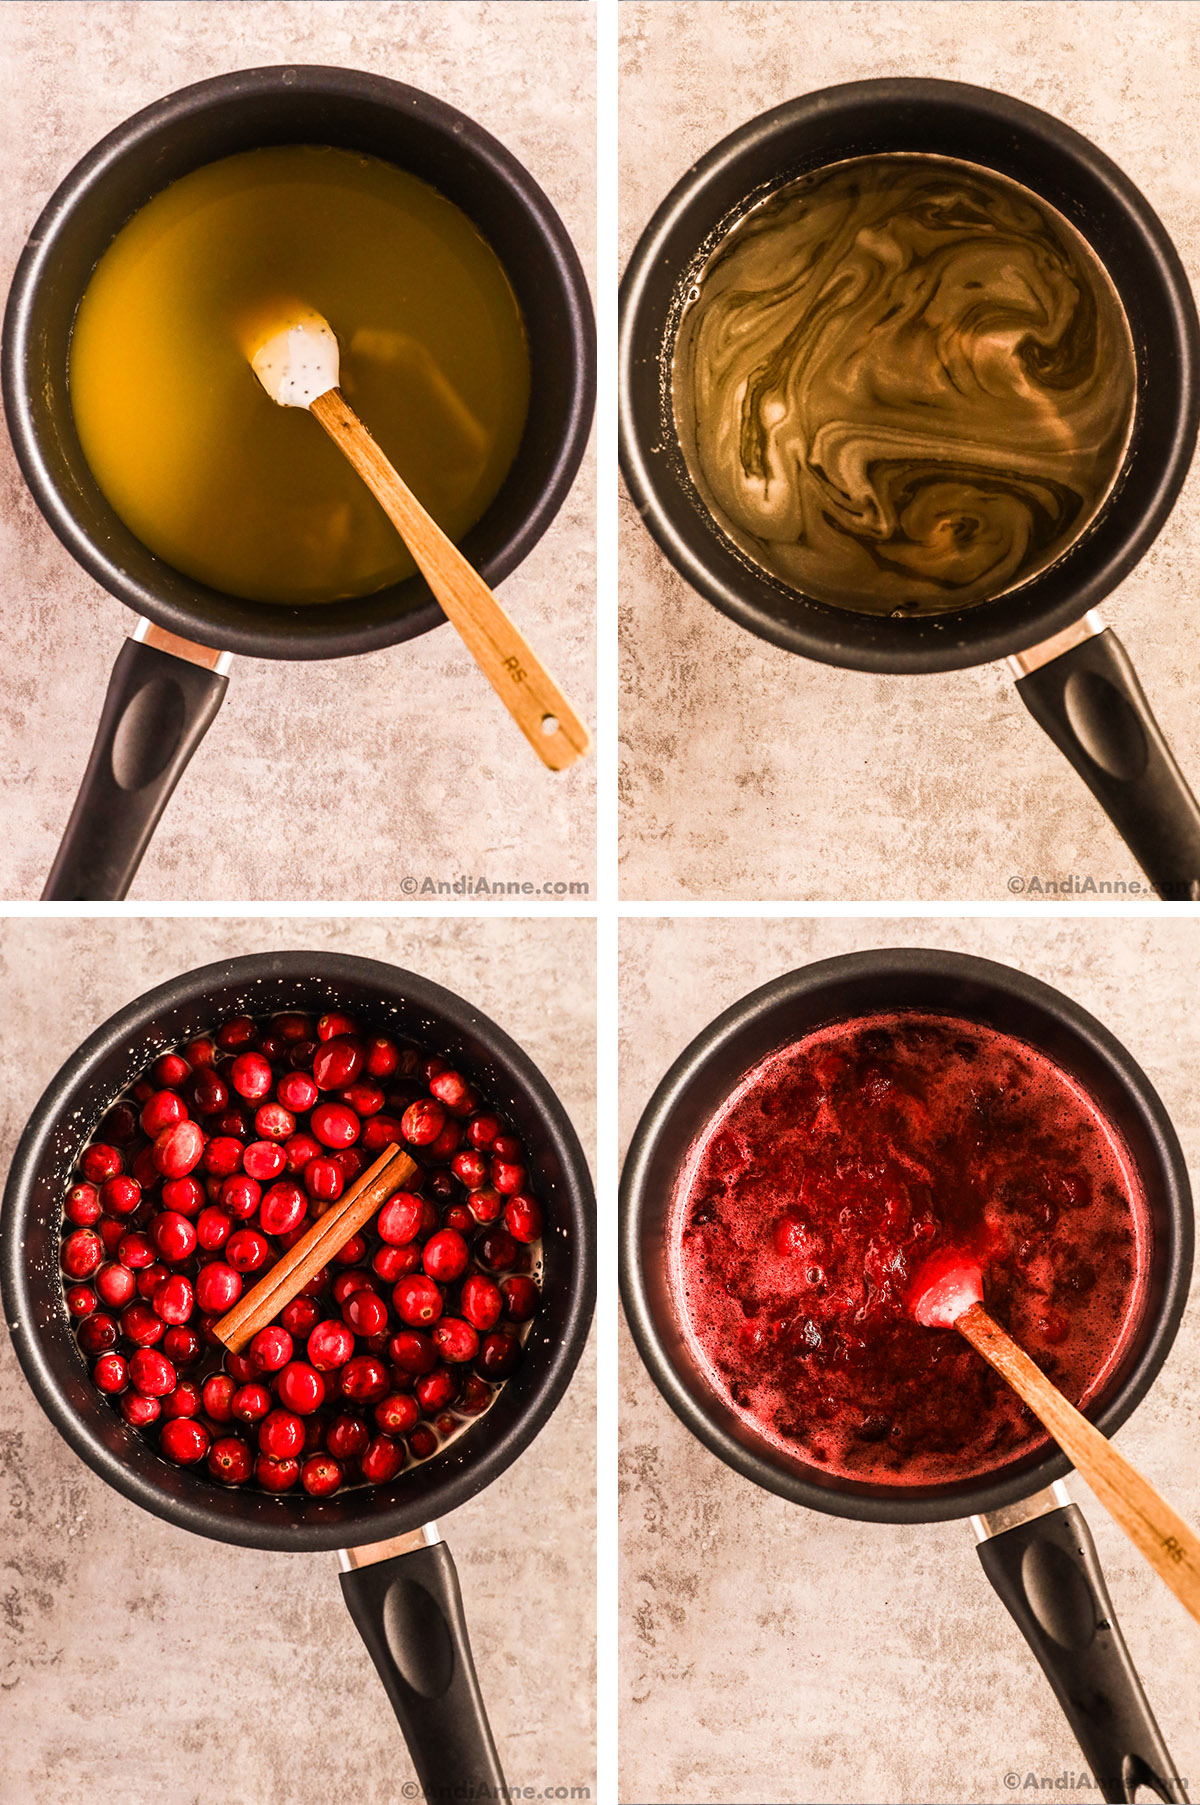 Four images of a saucepan, first two with honey and orange juice. Second two with fresh cranberries and cinnamon stick added, then broken down to a red sauce.